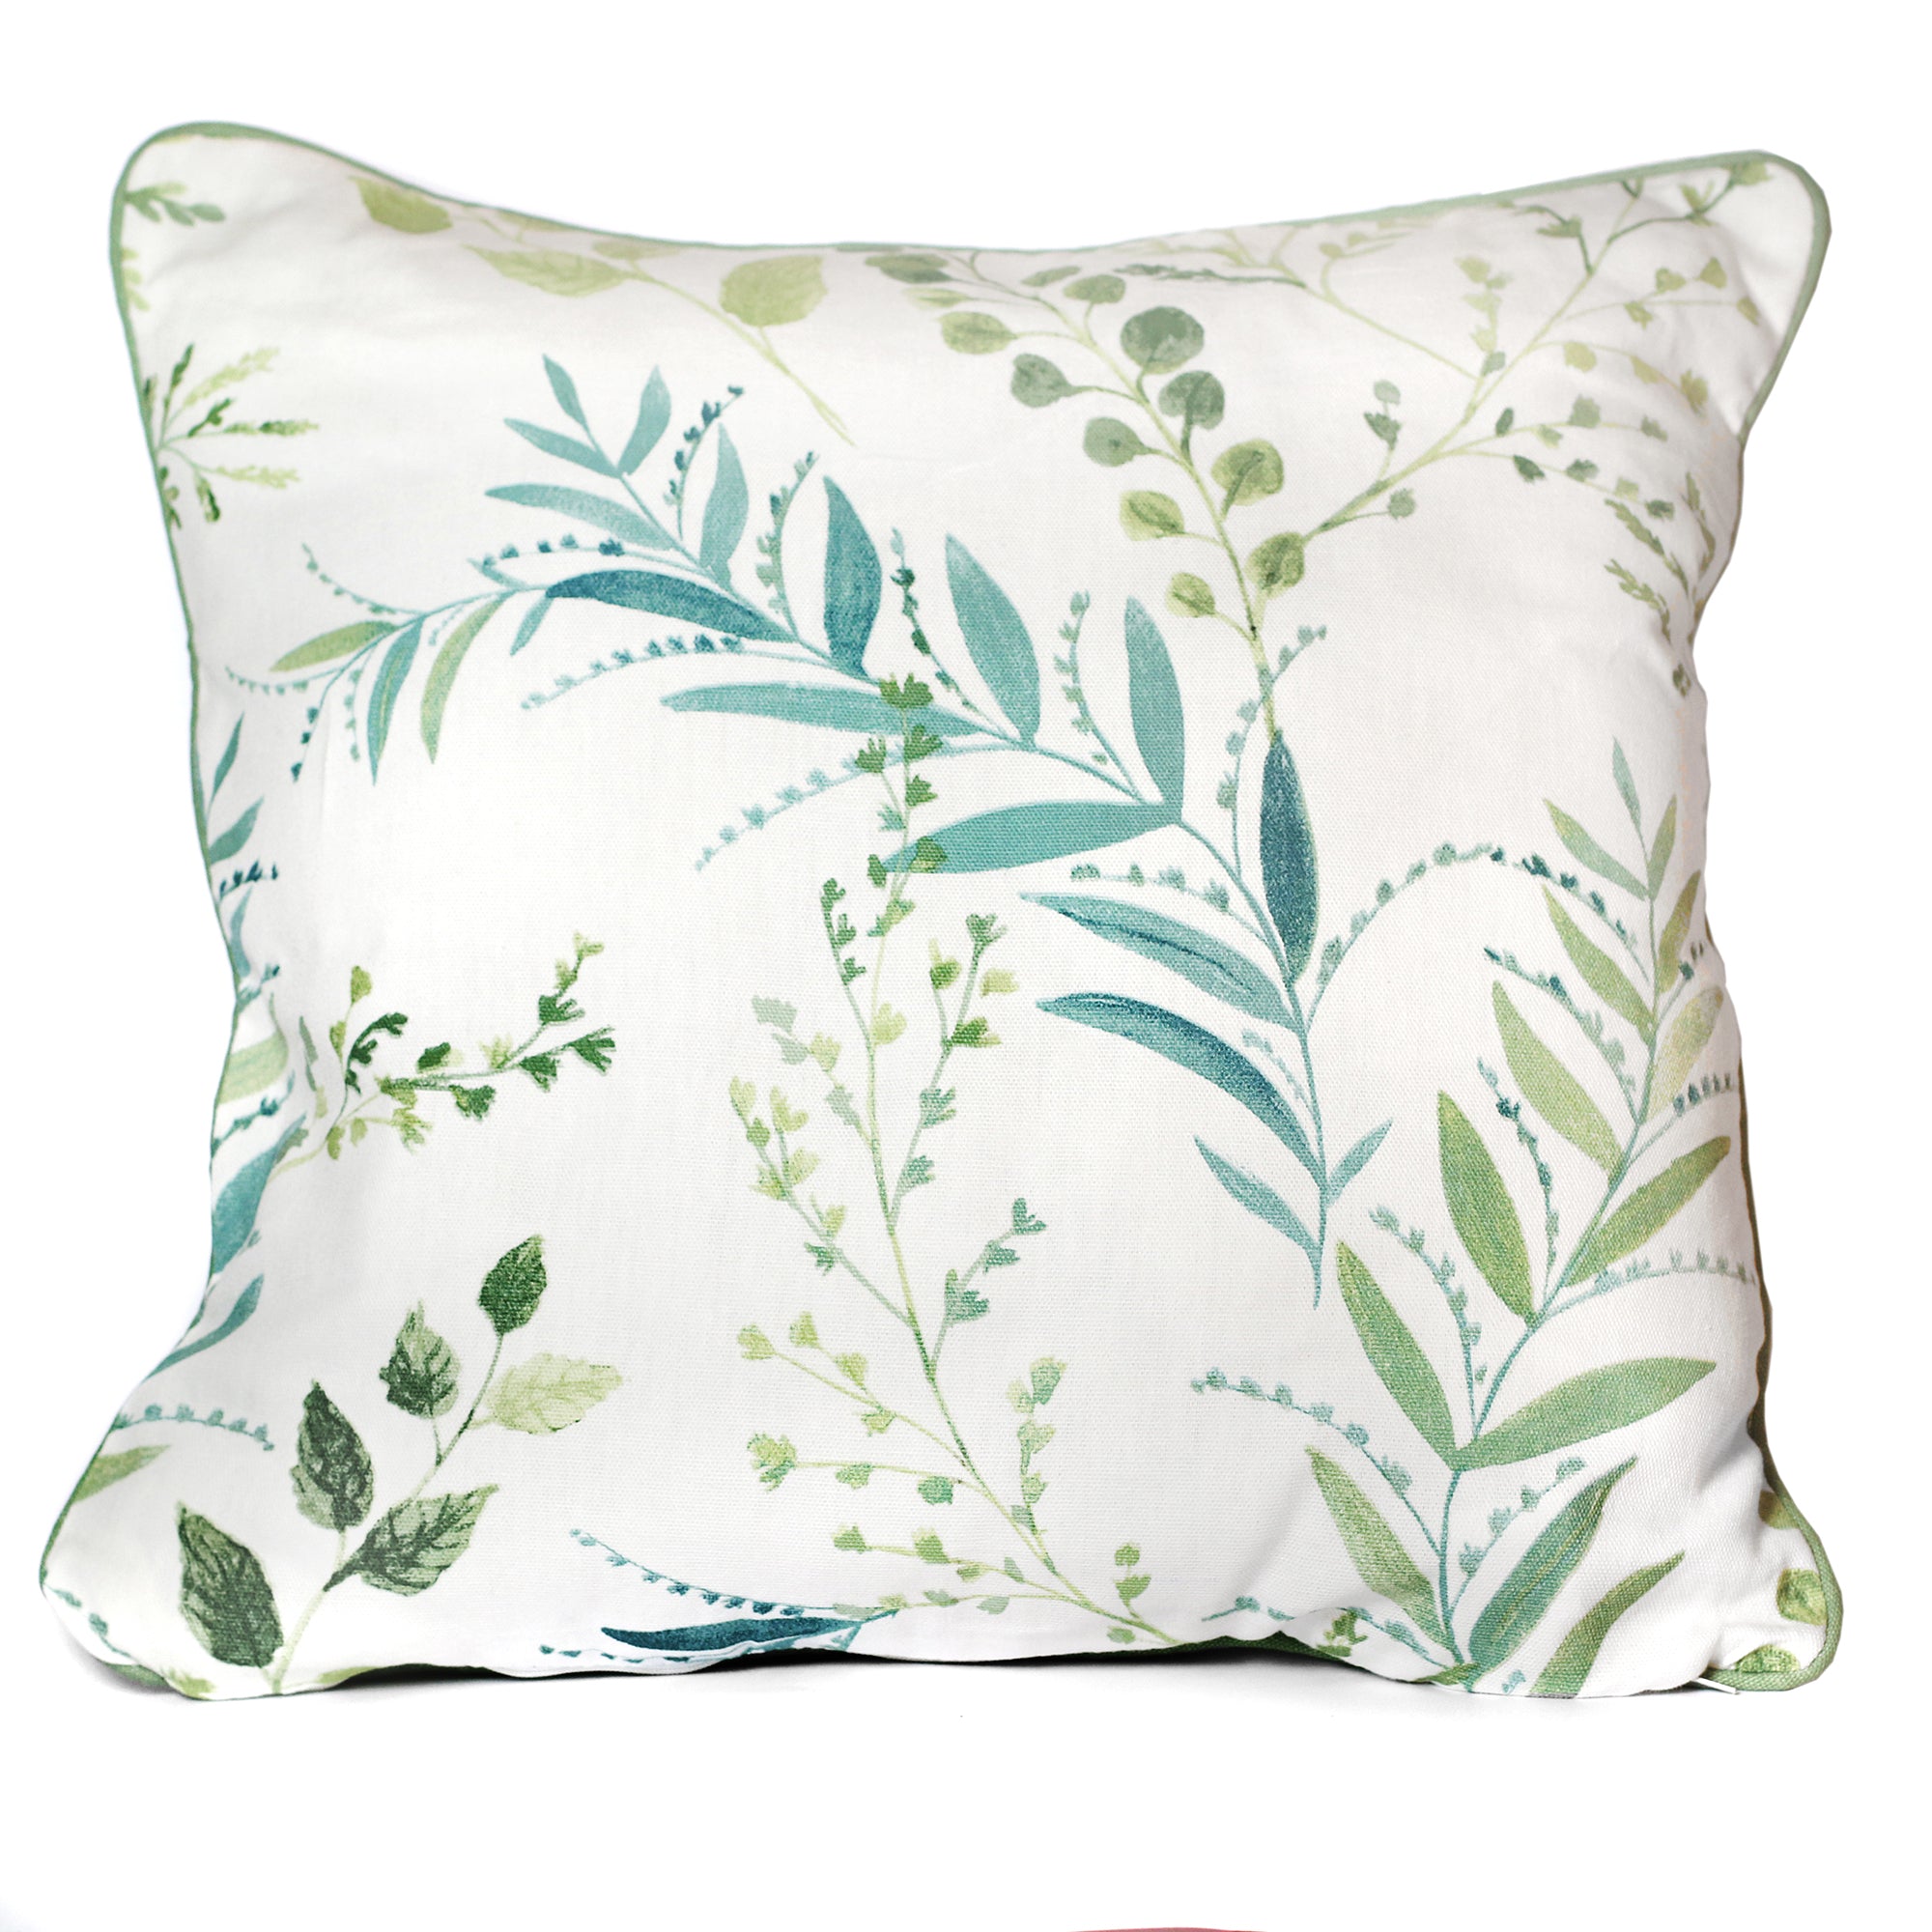 Fernworthy - Green Square Cushion Cover - by Fusion